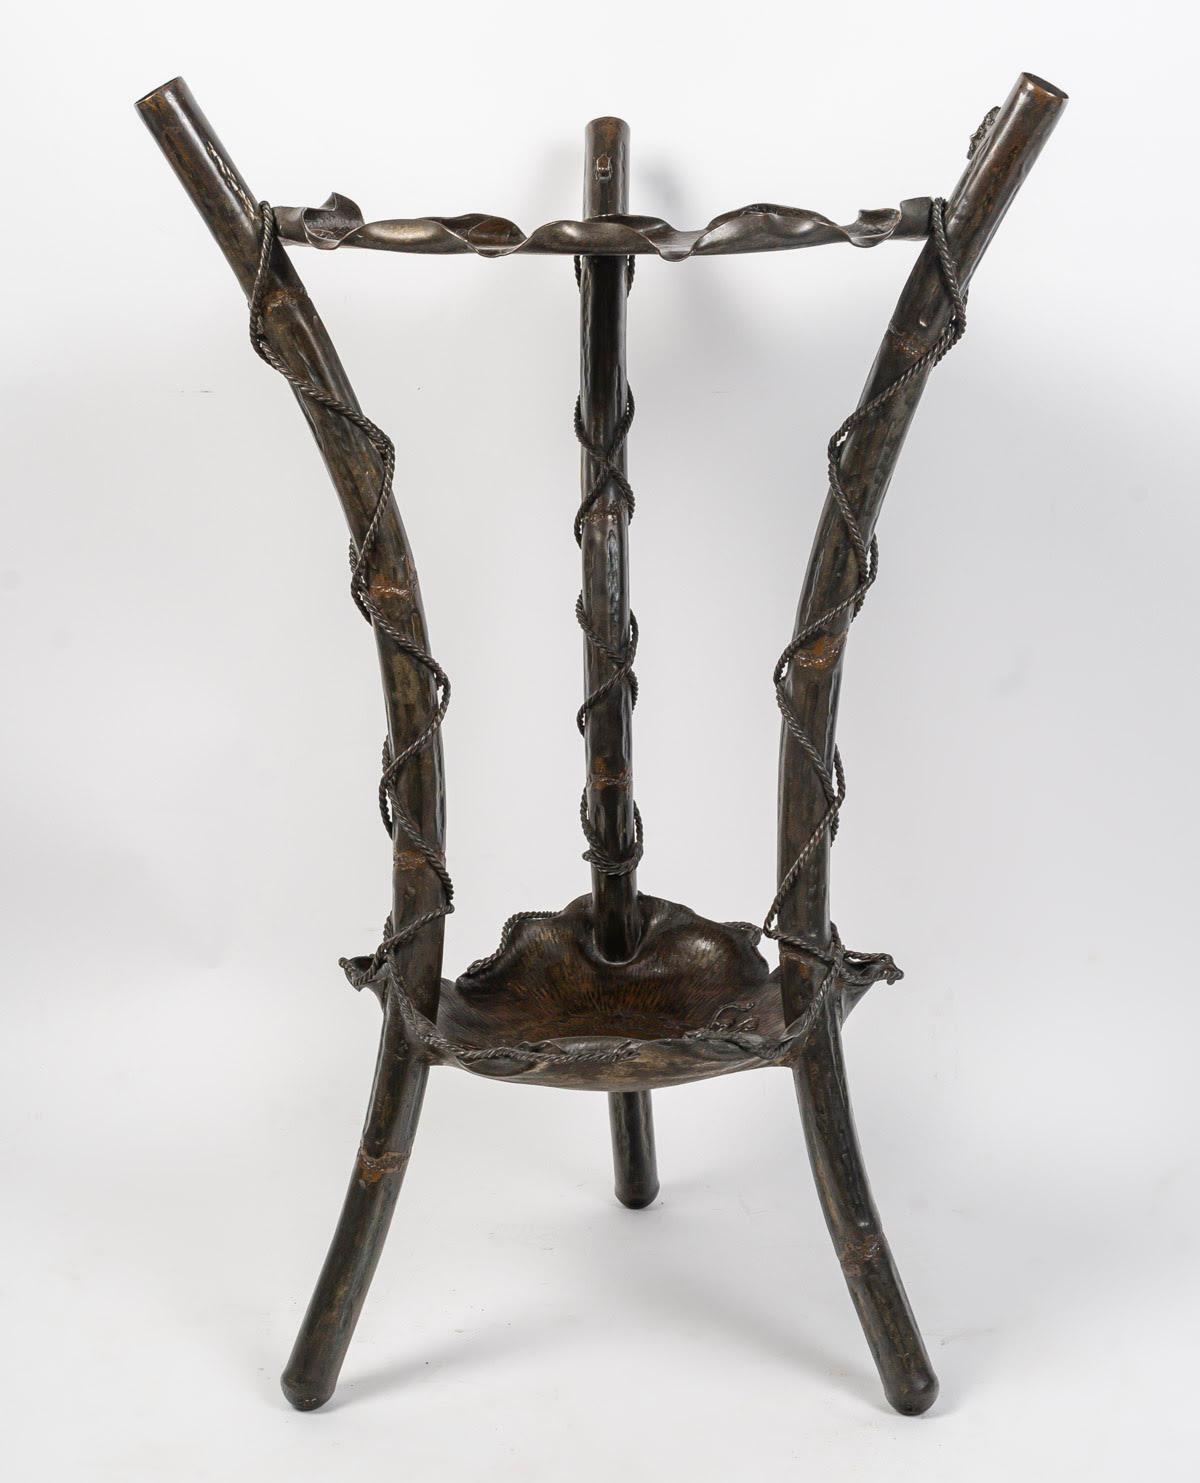 Tripod pedestal table with double bronze tops, Japan, Meiji period.

A tripod pedestal table with Japanese-style decorations of insects and flowers in relief on water lily leaves, double bronze trays with a brown patina, Japan, late Meiji period.
H: